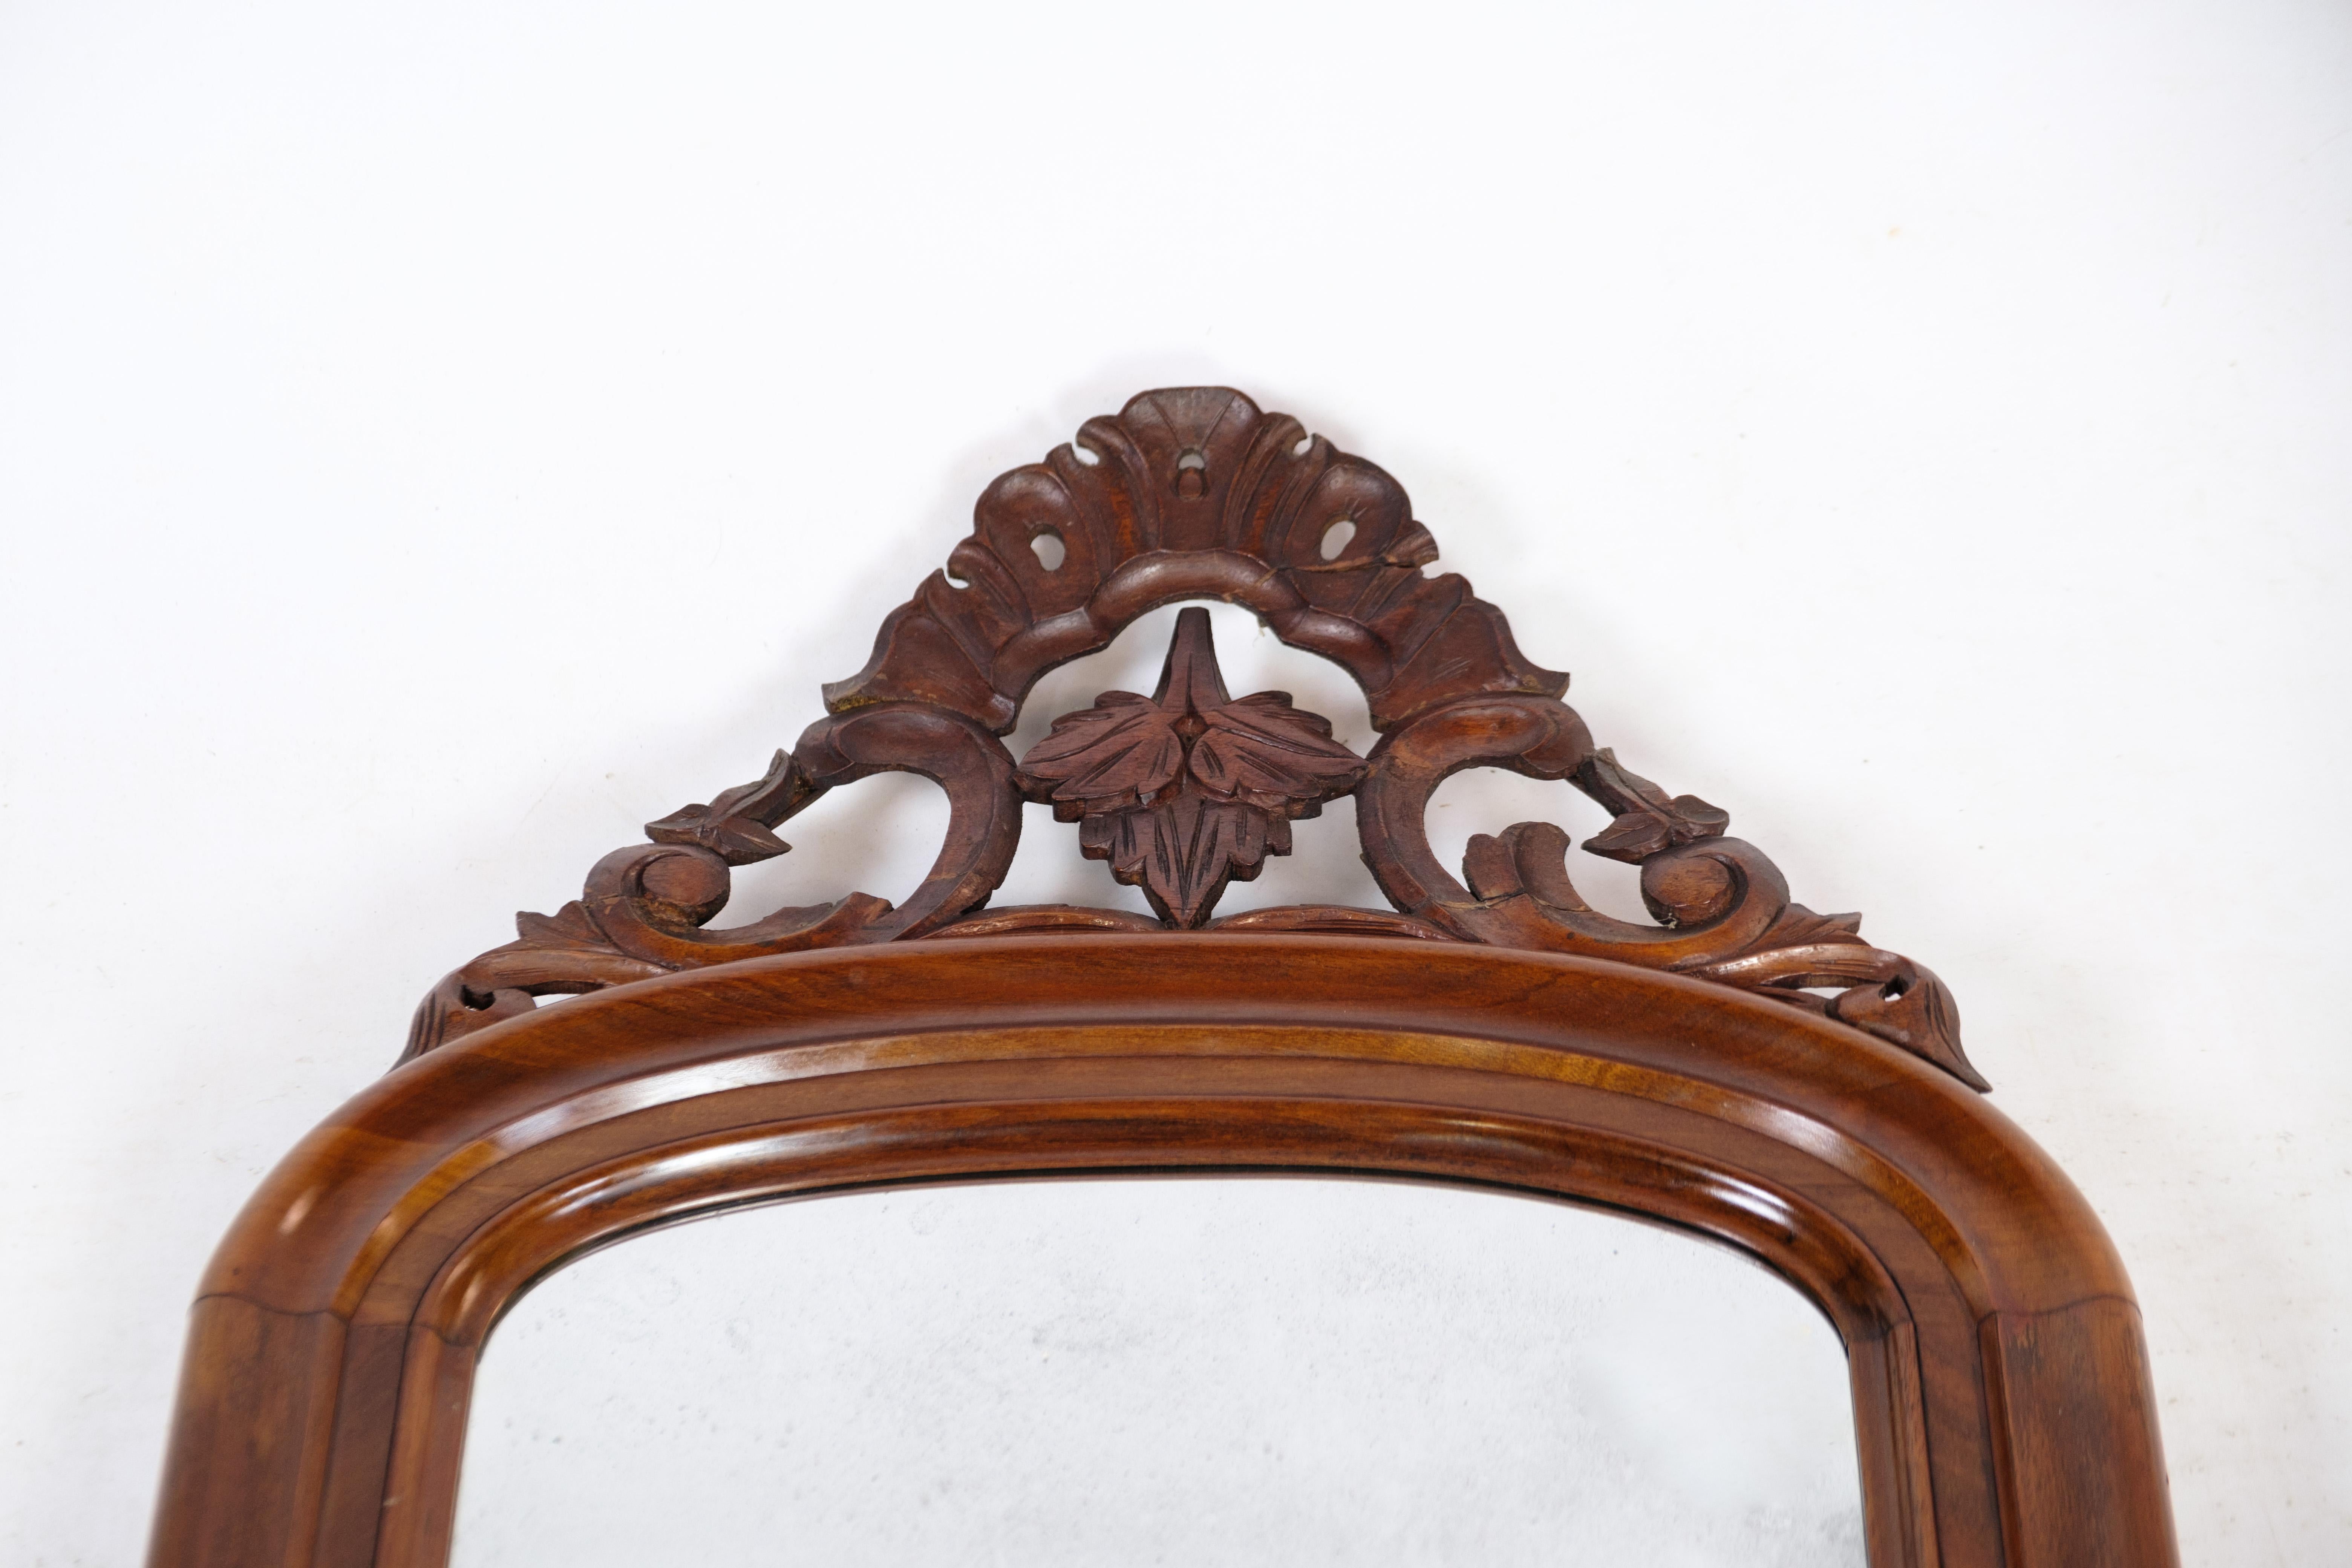 Antique Mirror in Mahogany Wood, Decorated with Carvings from Around the 1860s 1